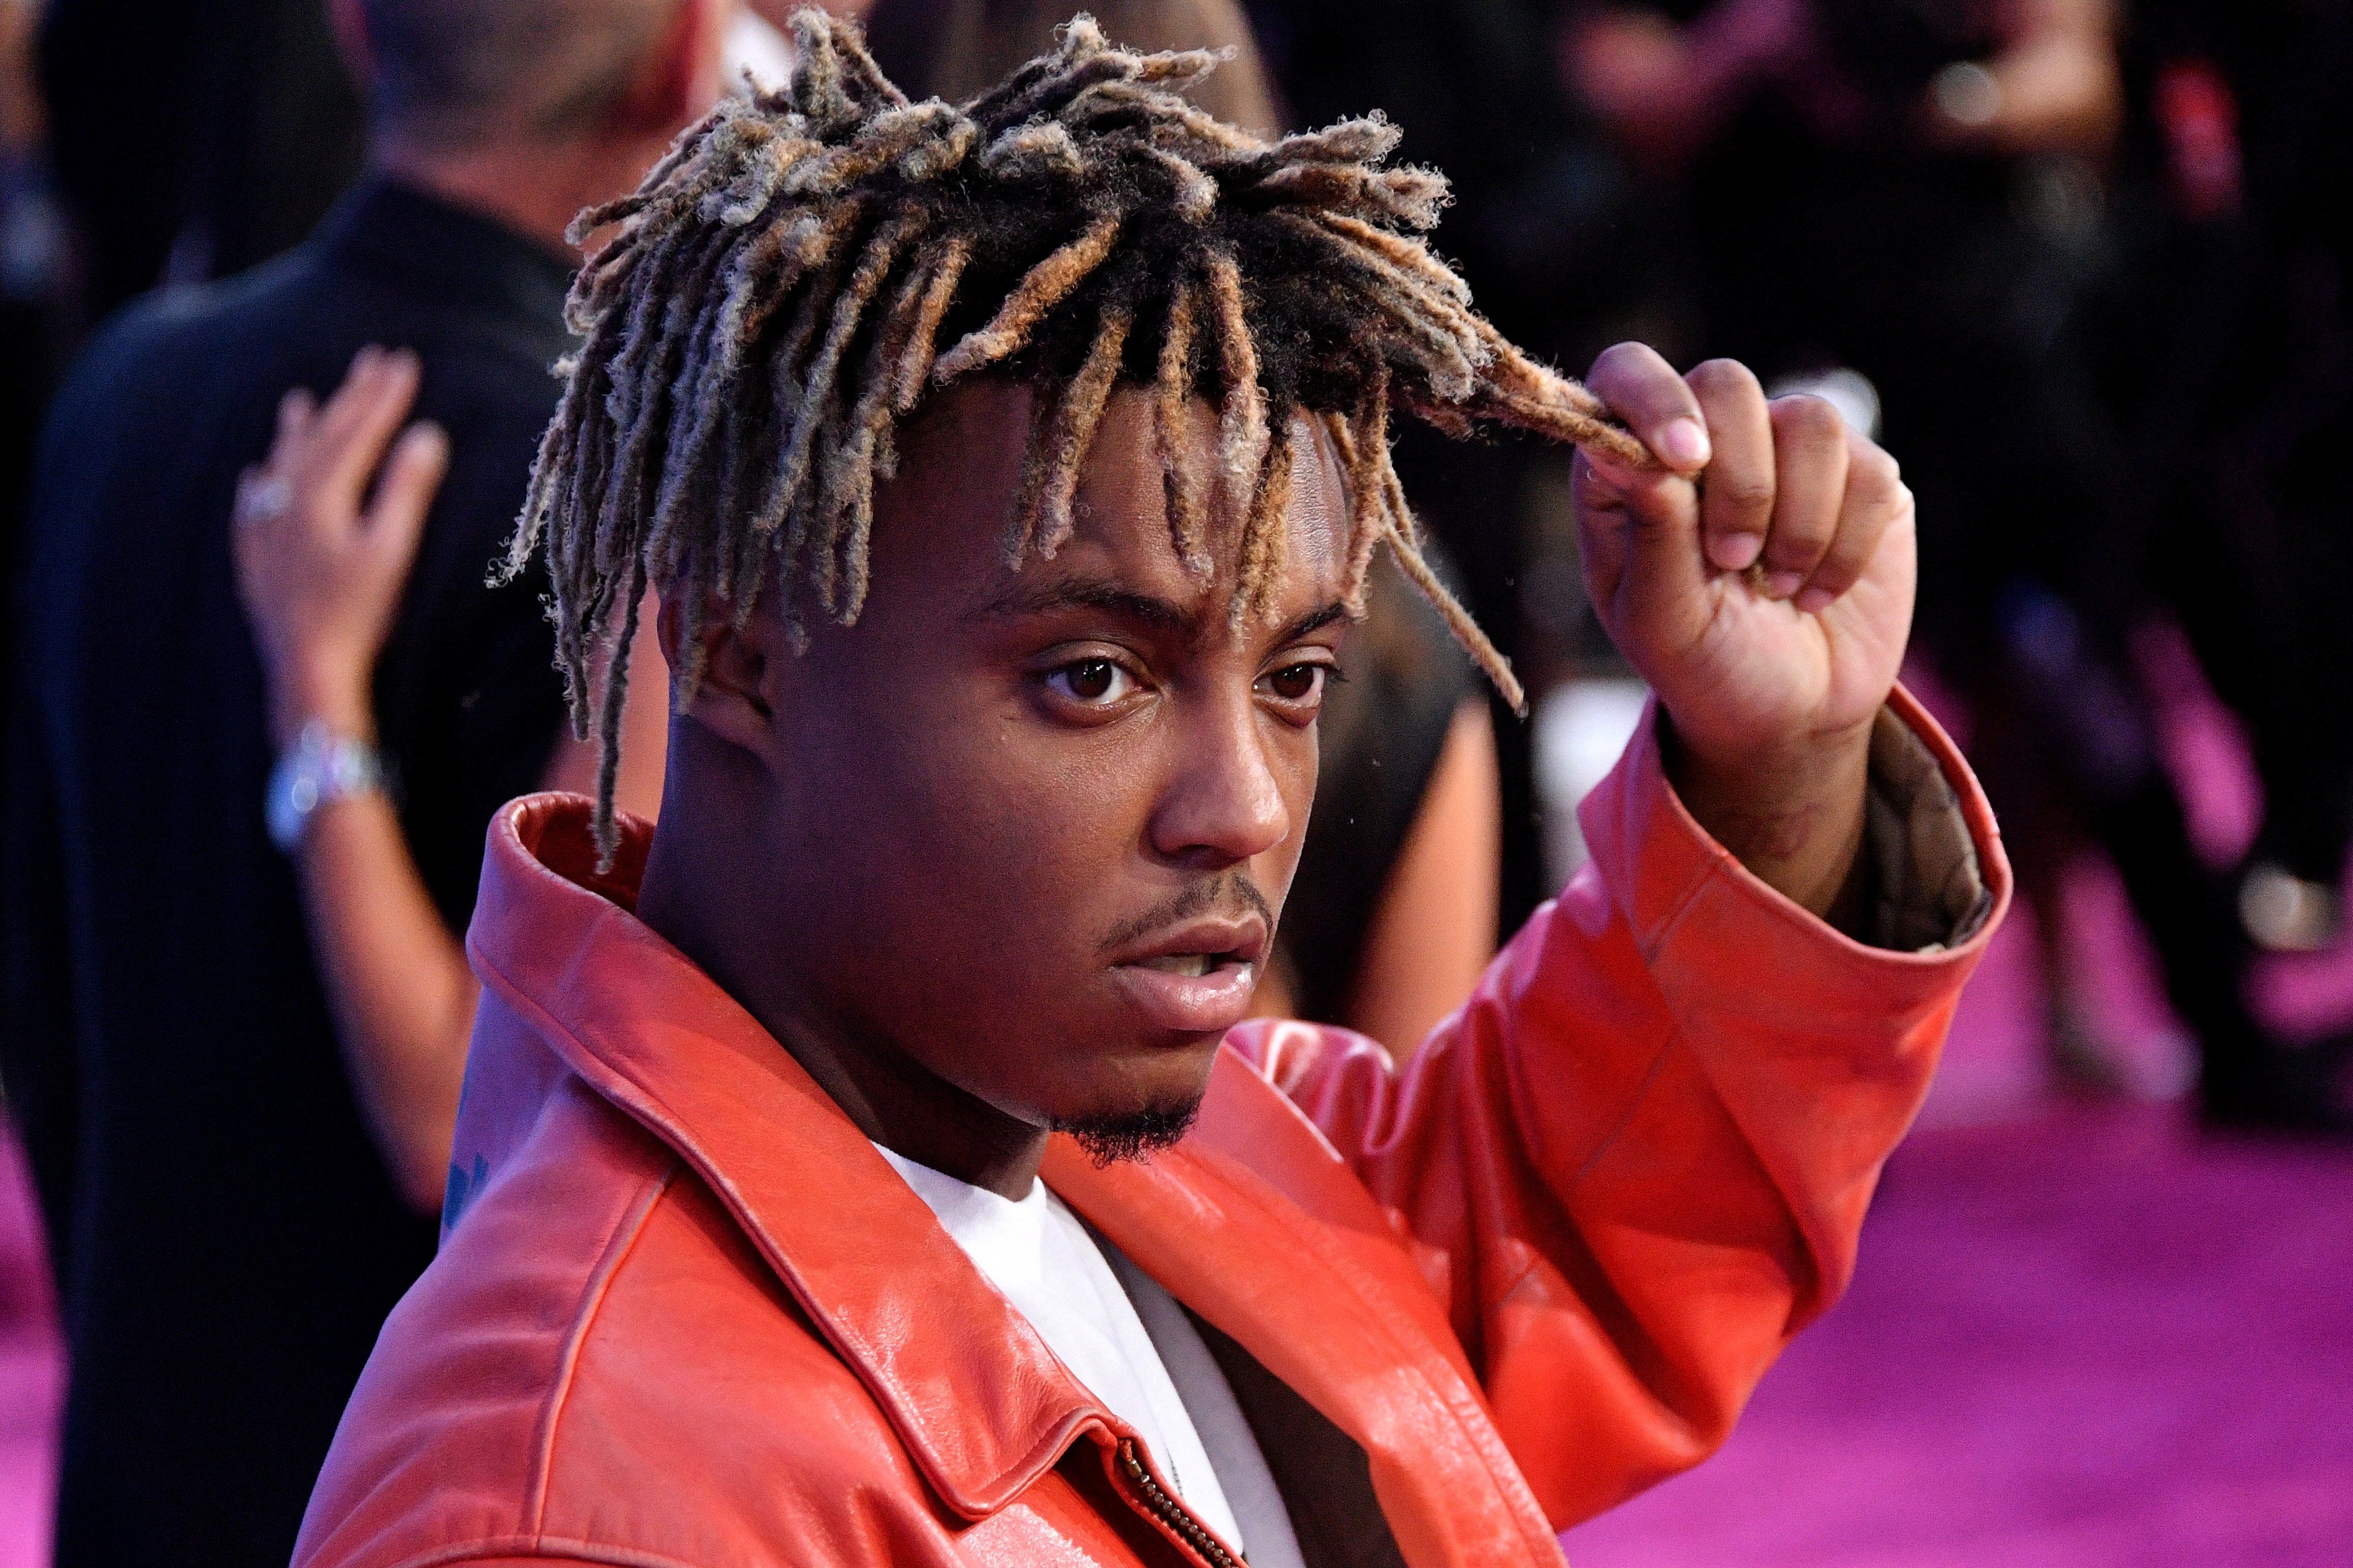 Juice Wrld at the 2018 MTV Video Music Awards at Radio City Music Hall in New York City/ Source: Getty Images